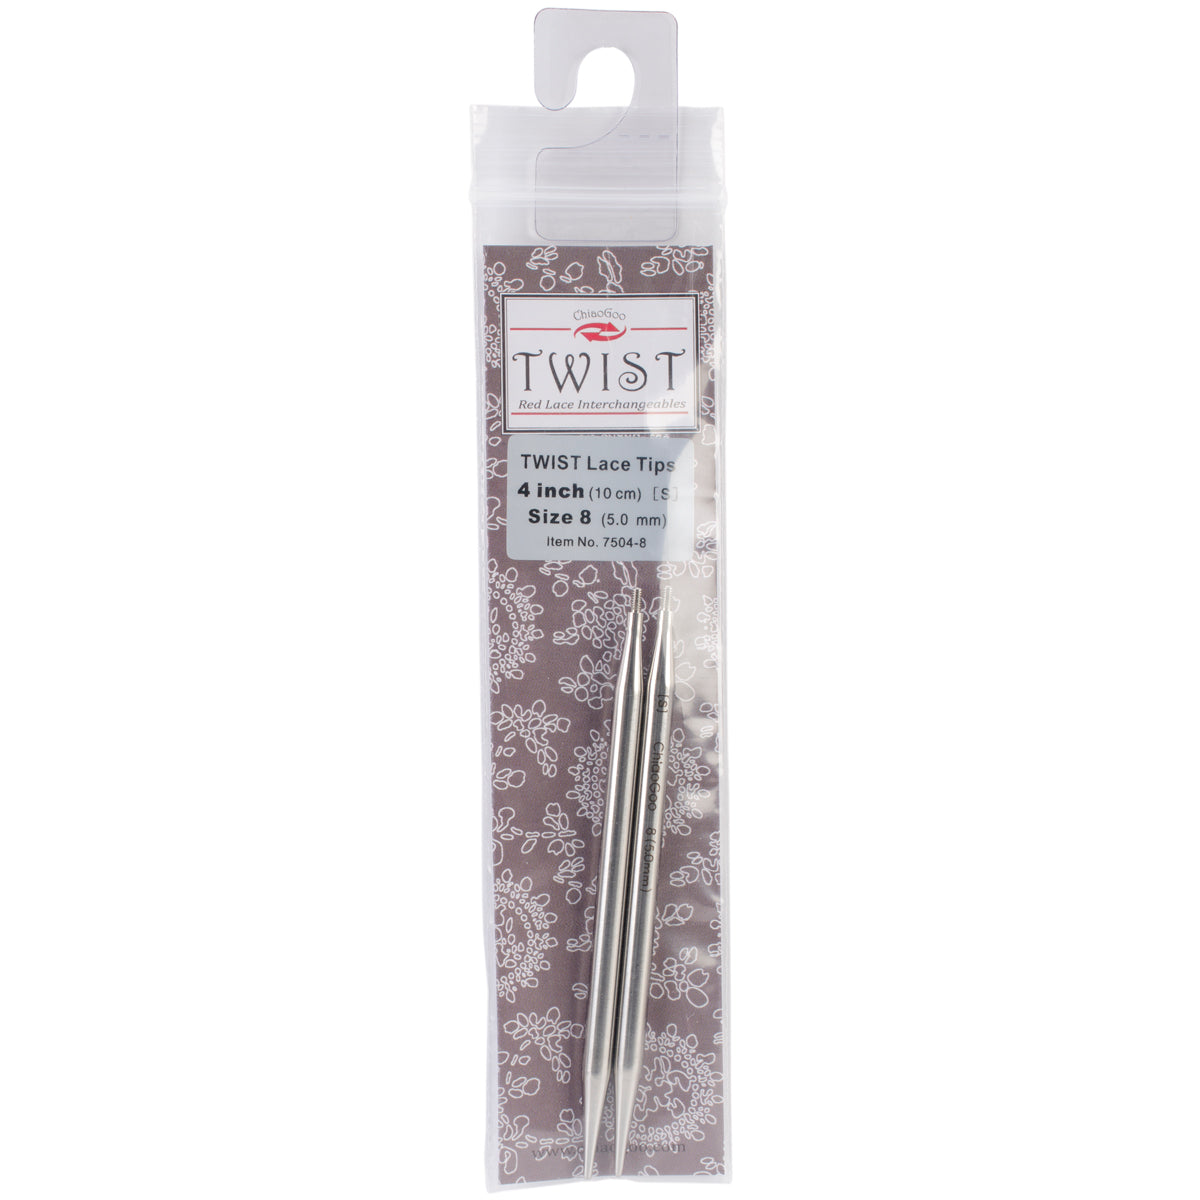 ChiaoGoo TWIST Red Lace Interchangeable Tips 4 Inch - Size 8/5 mm